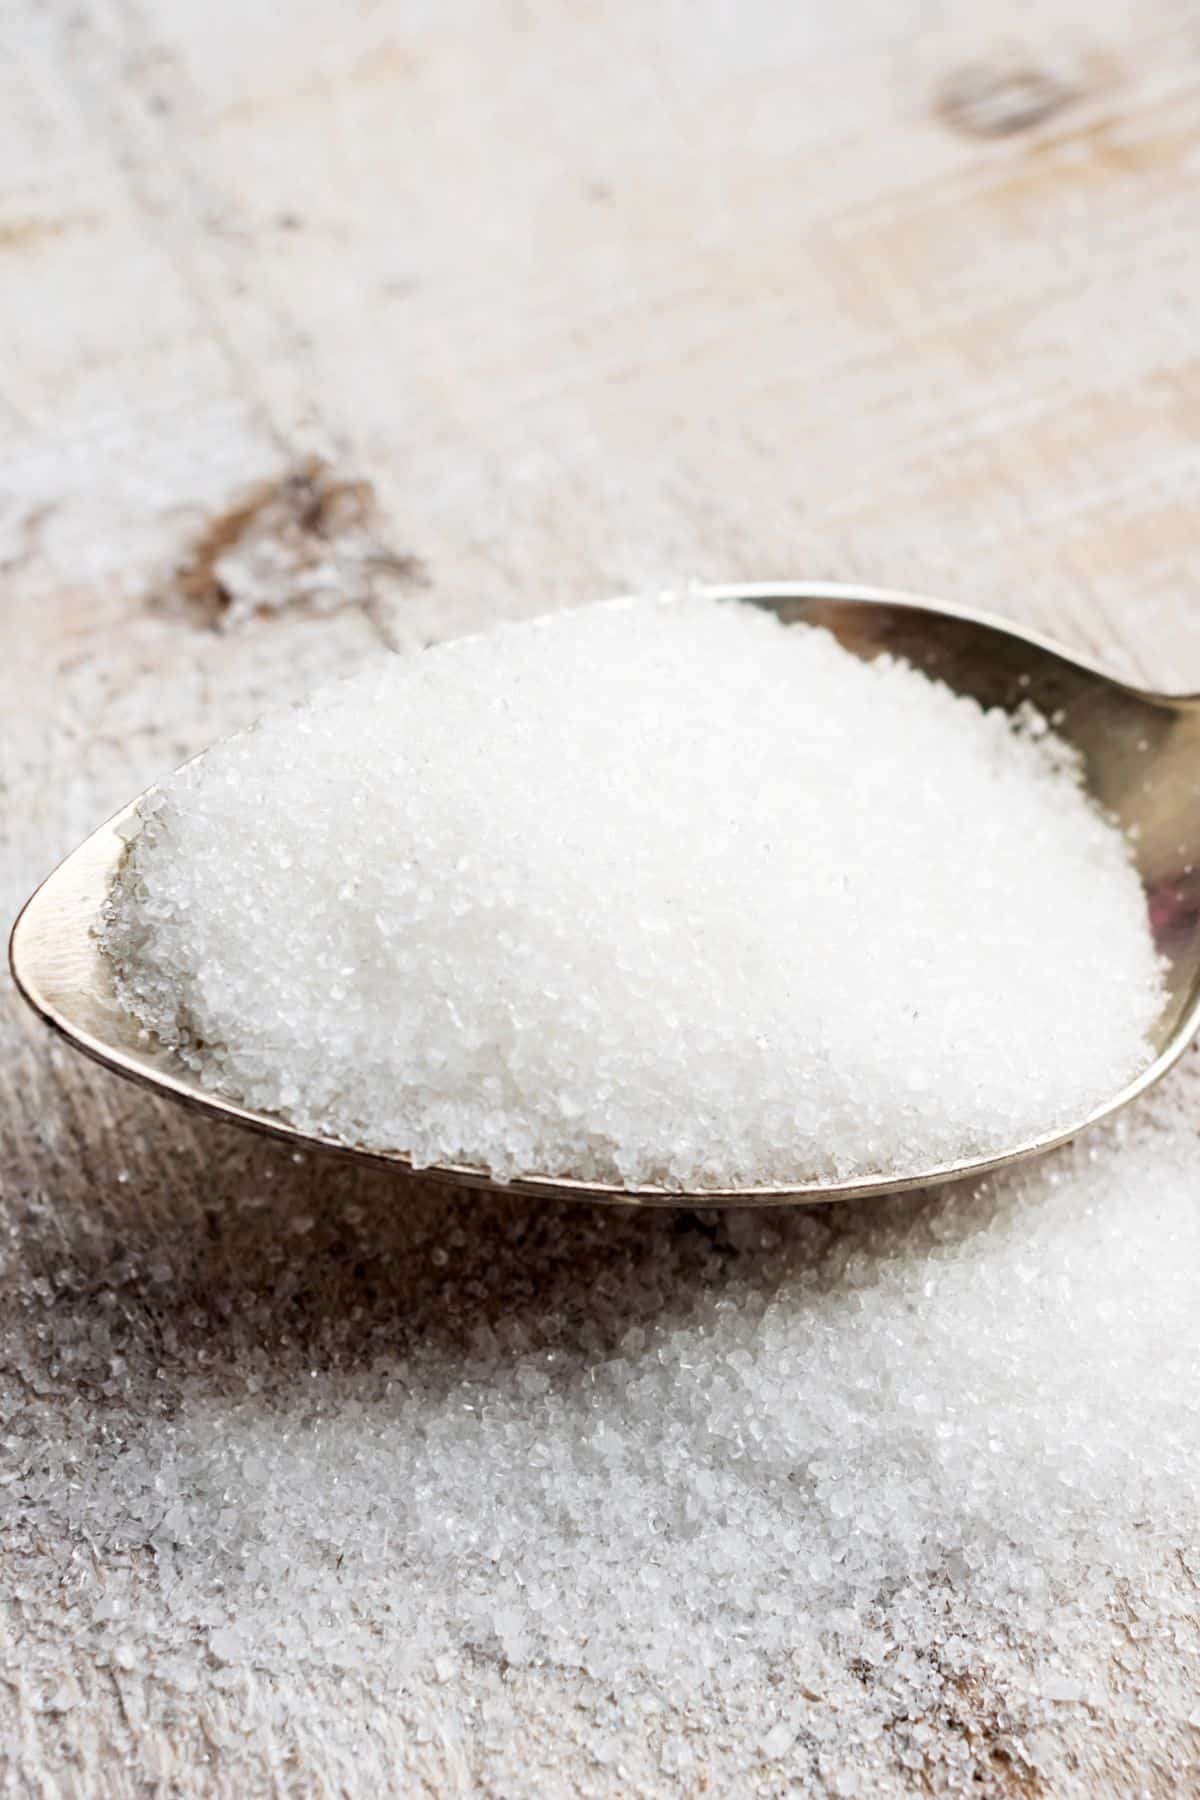 a spoon full of sucralose spilling onto a wooden table.